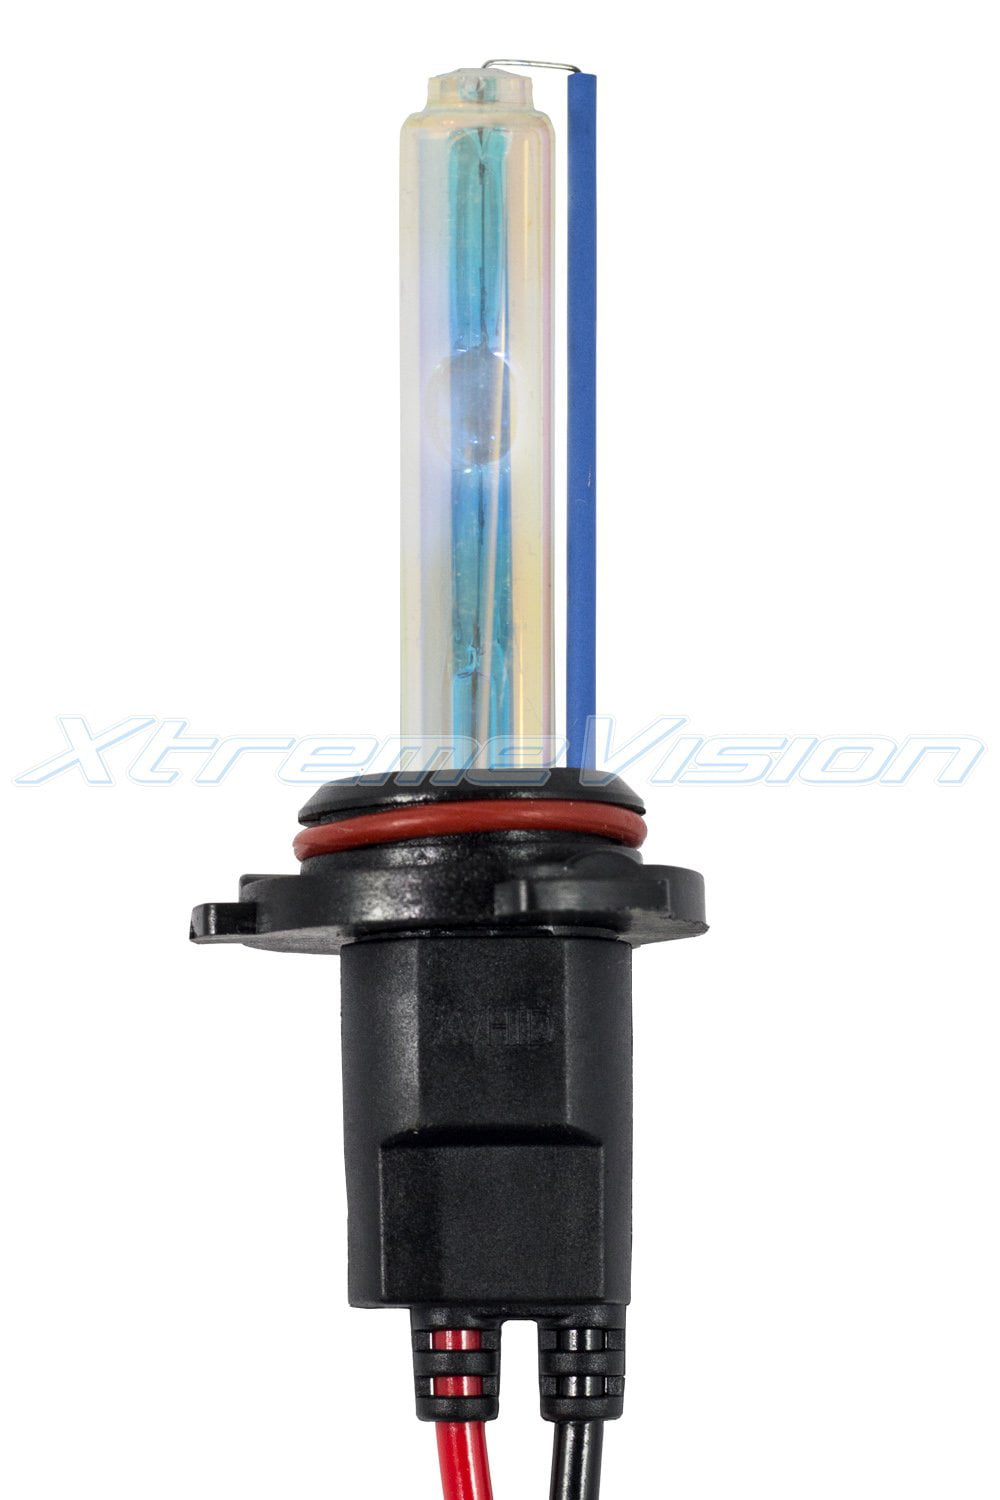 Xtreme DX 12V LED for xenon and halogen headlights